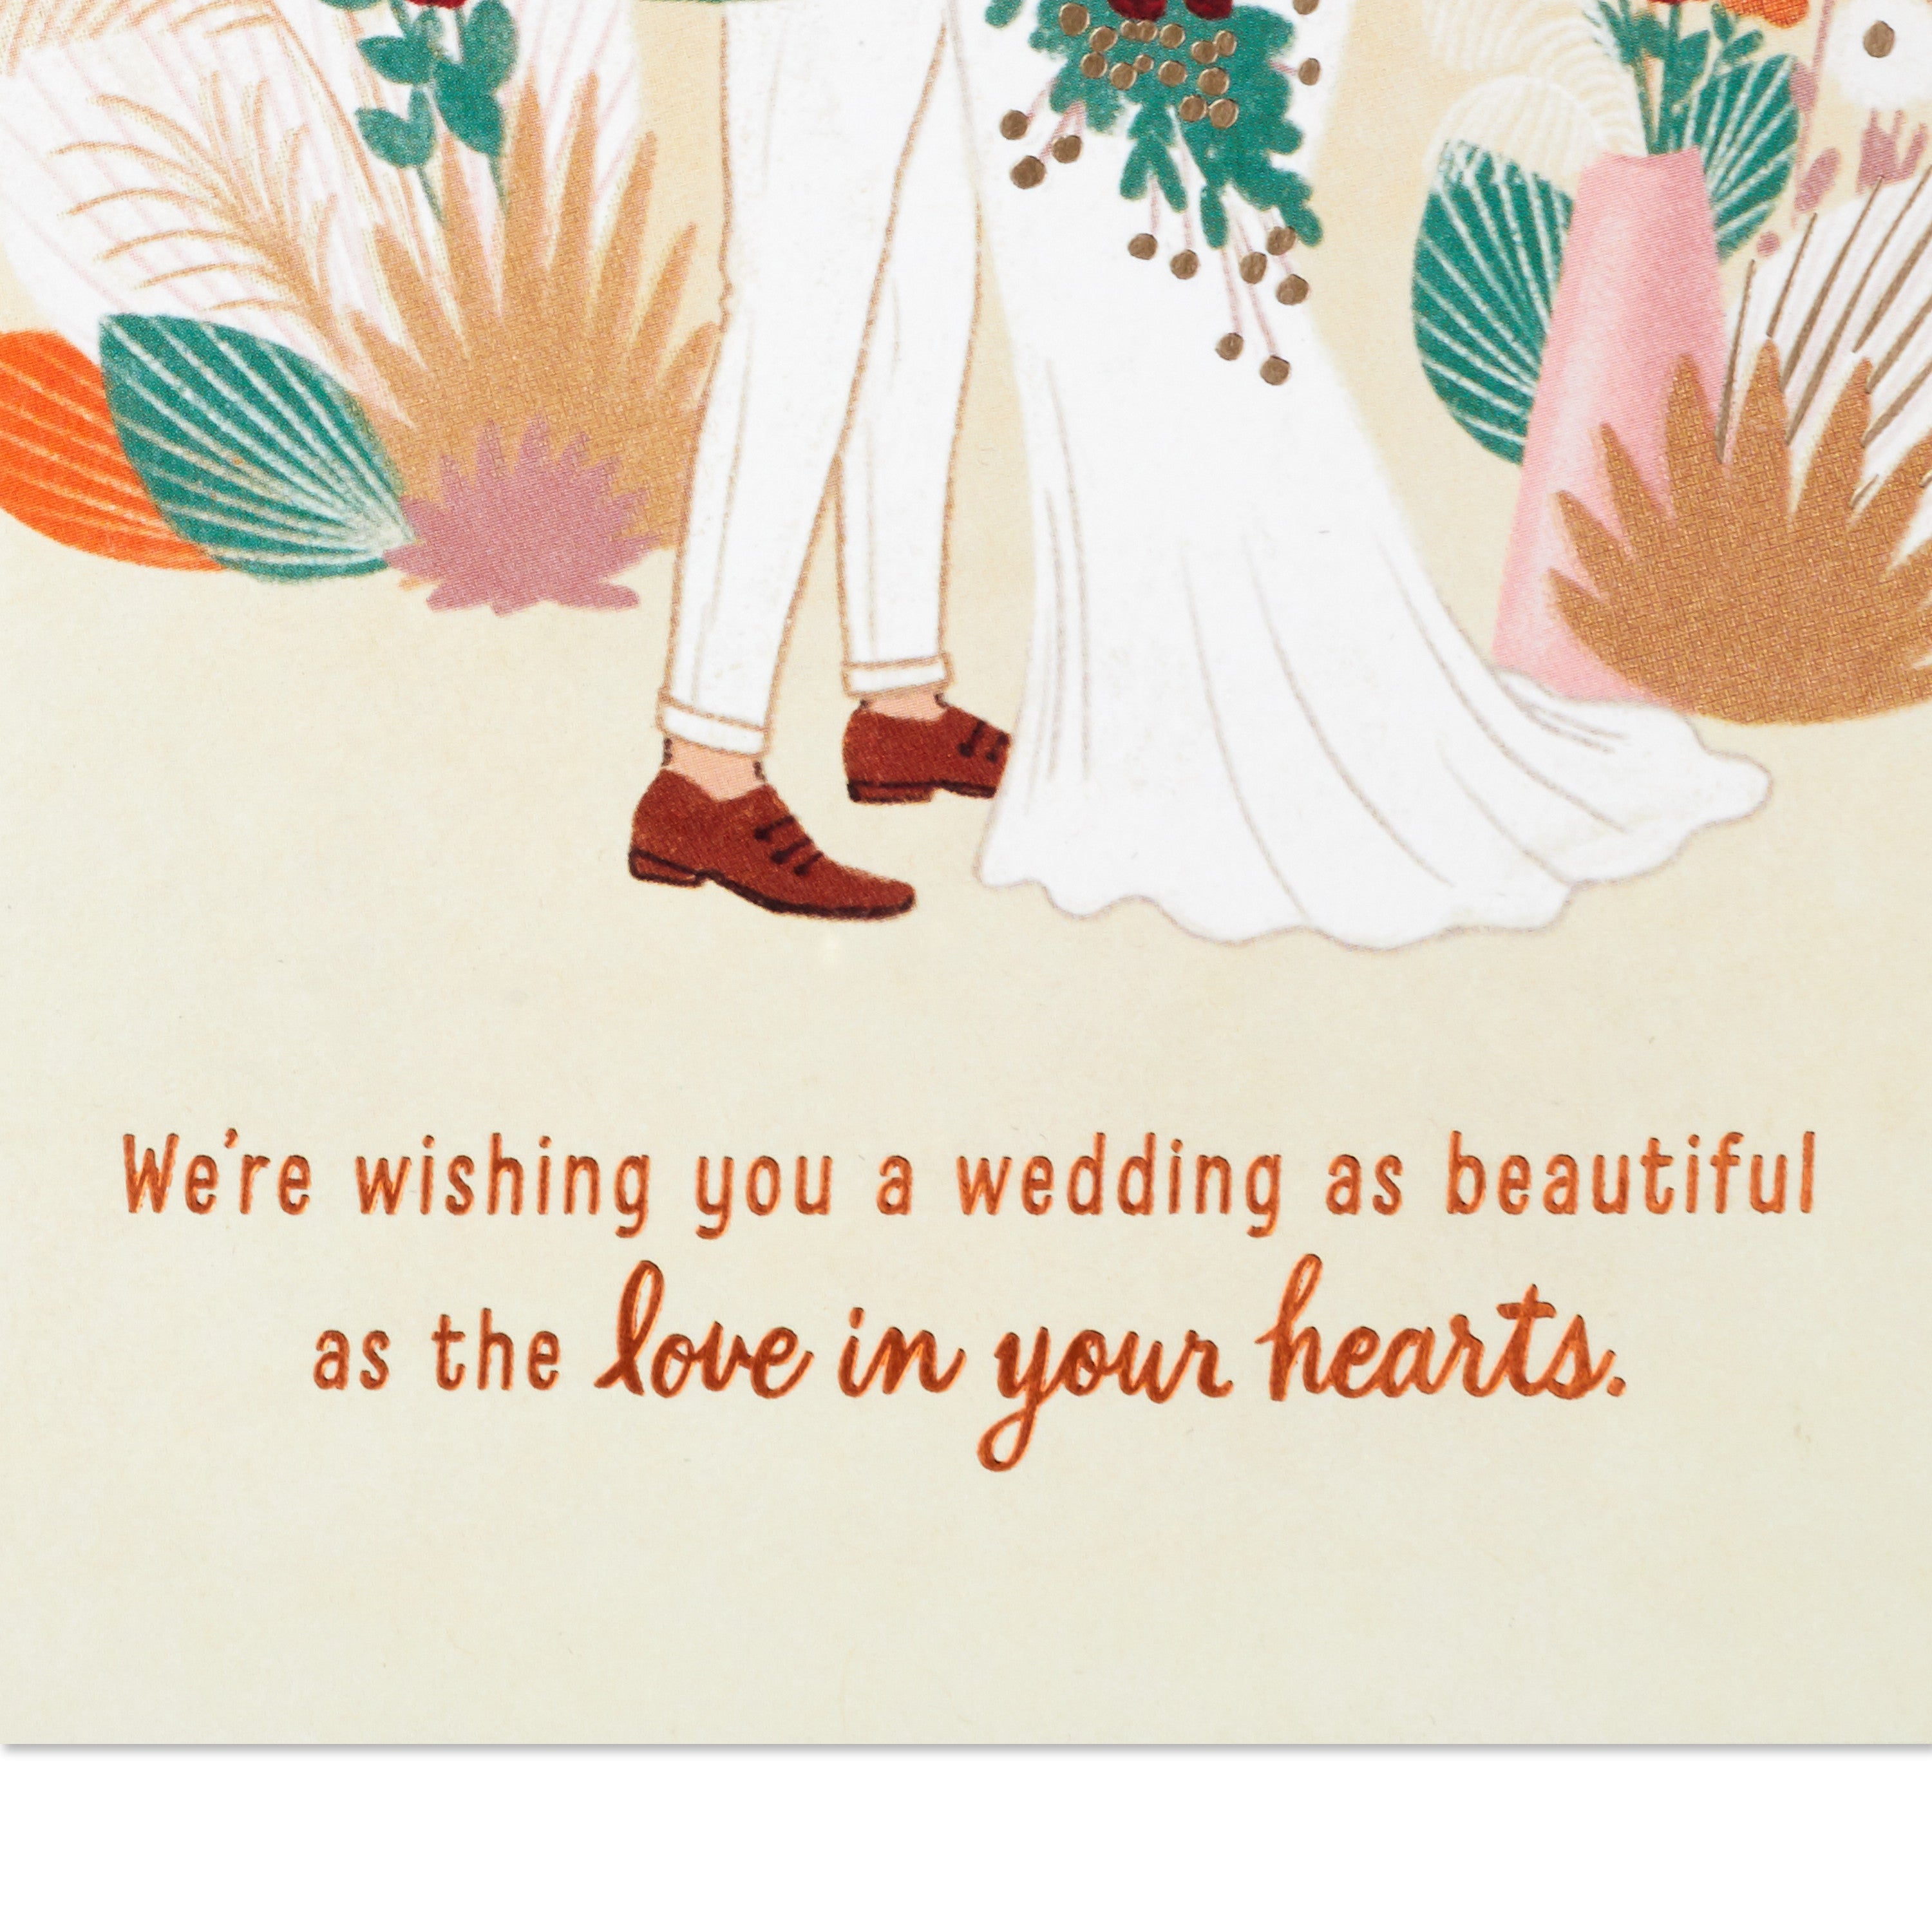 Hallmark Wedding Card, Bridal Shower Card, Engagement Card from All (Celebrating You Two)